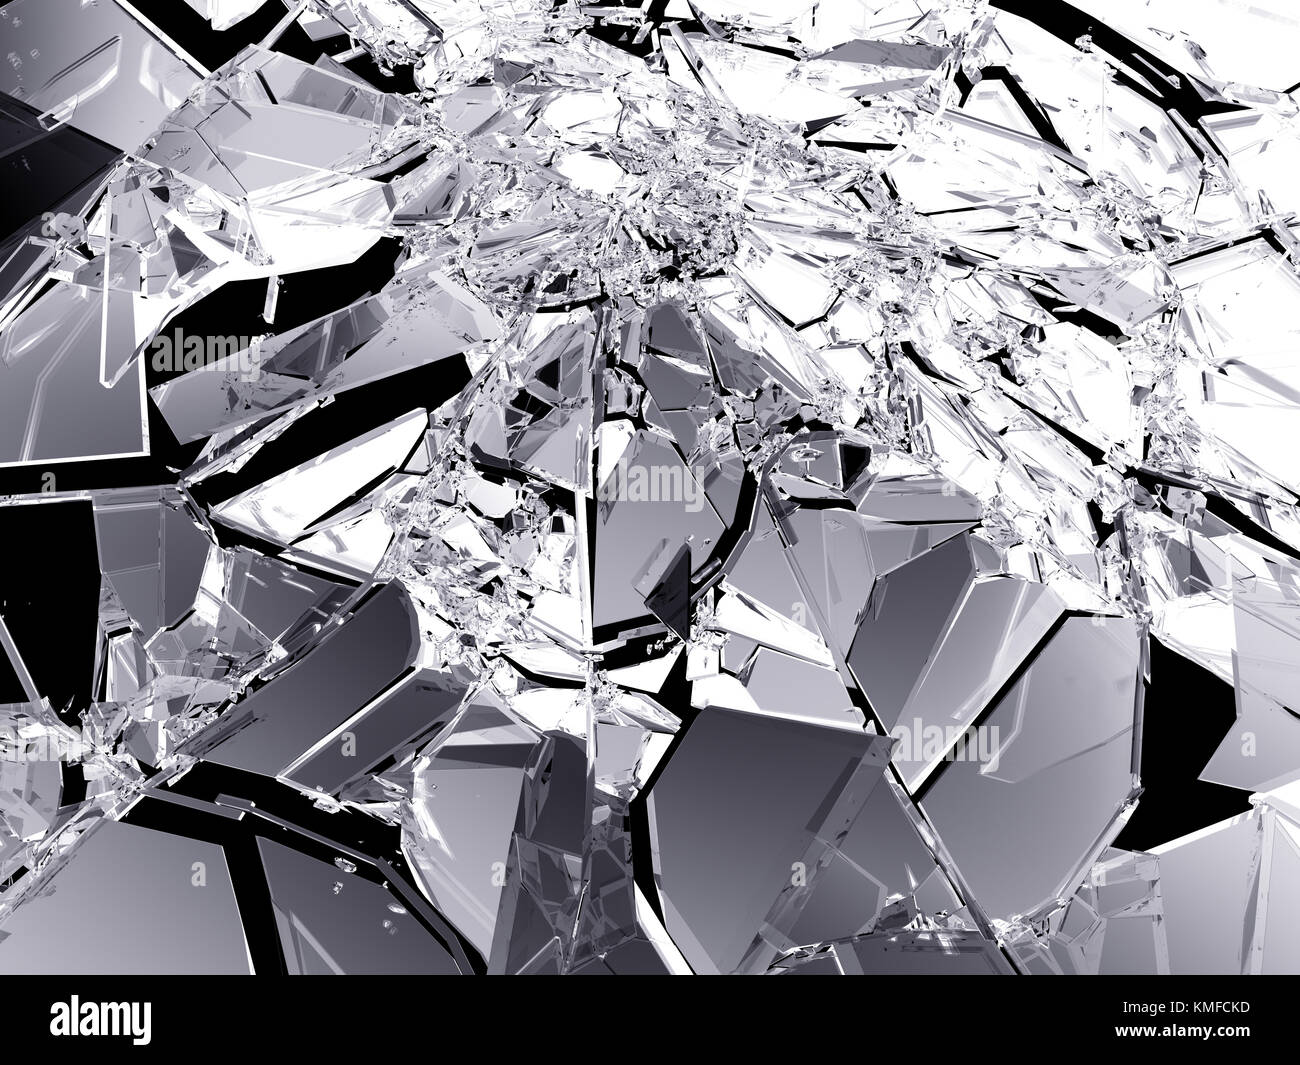 Shattered or broken glass Pieces isolated, Stock image